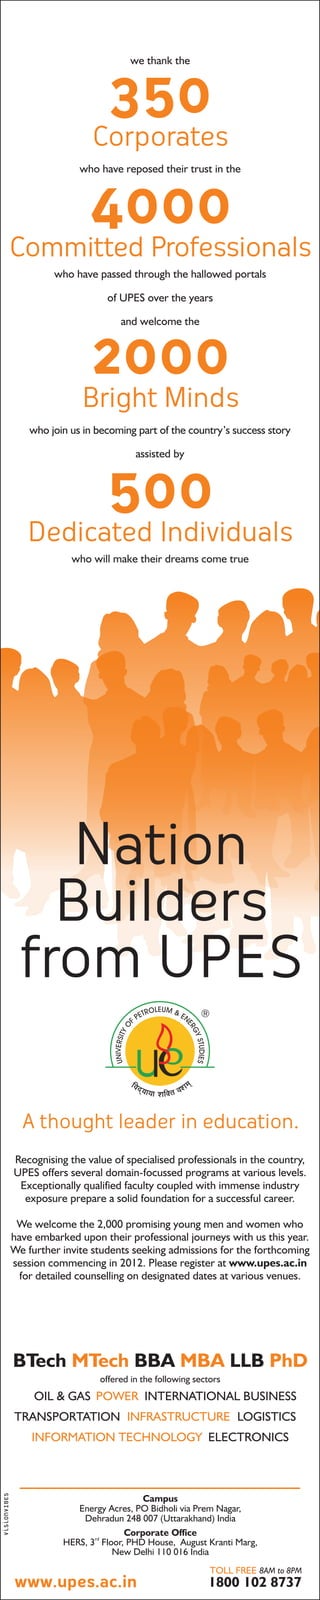 Nation Builders From UPES - Kick start 2012